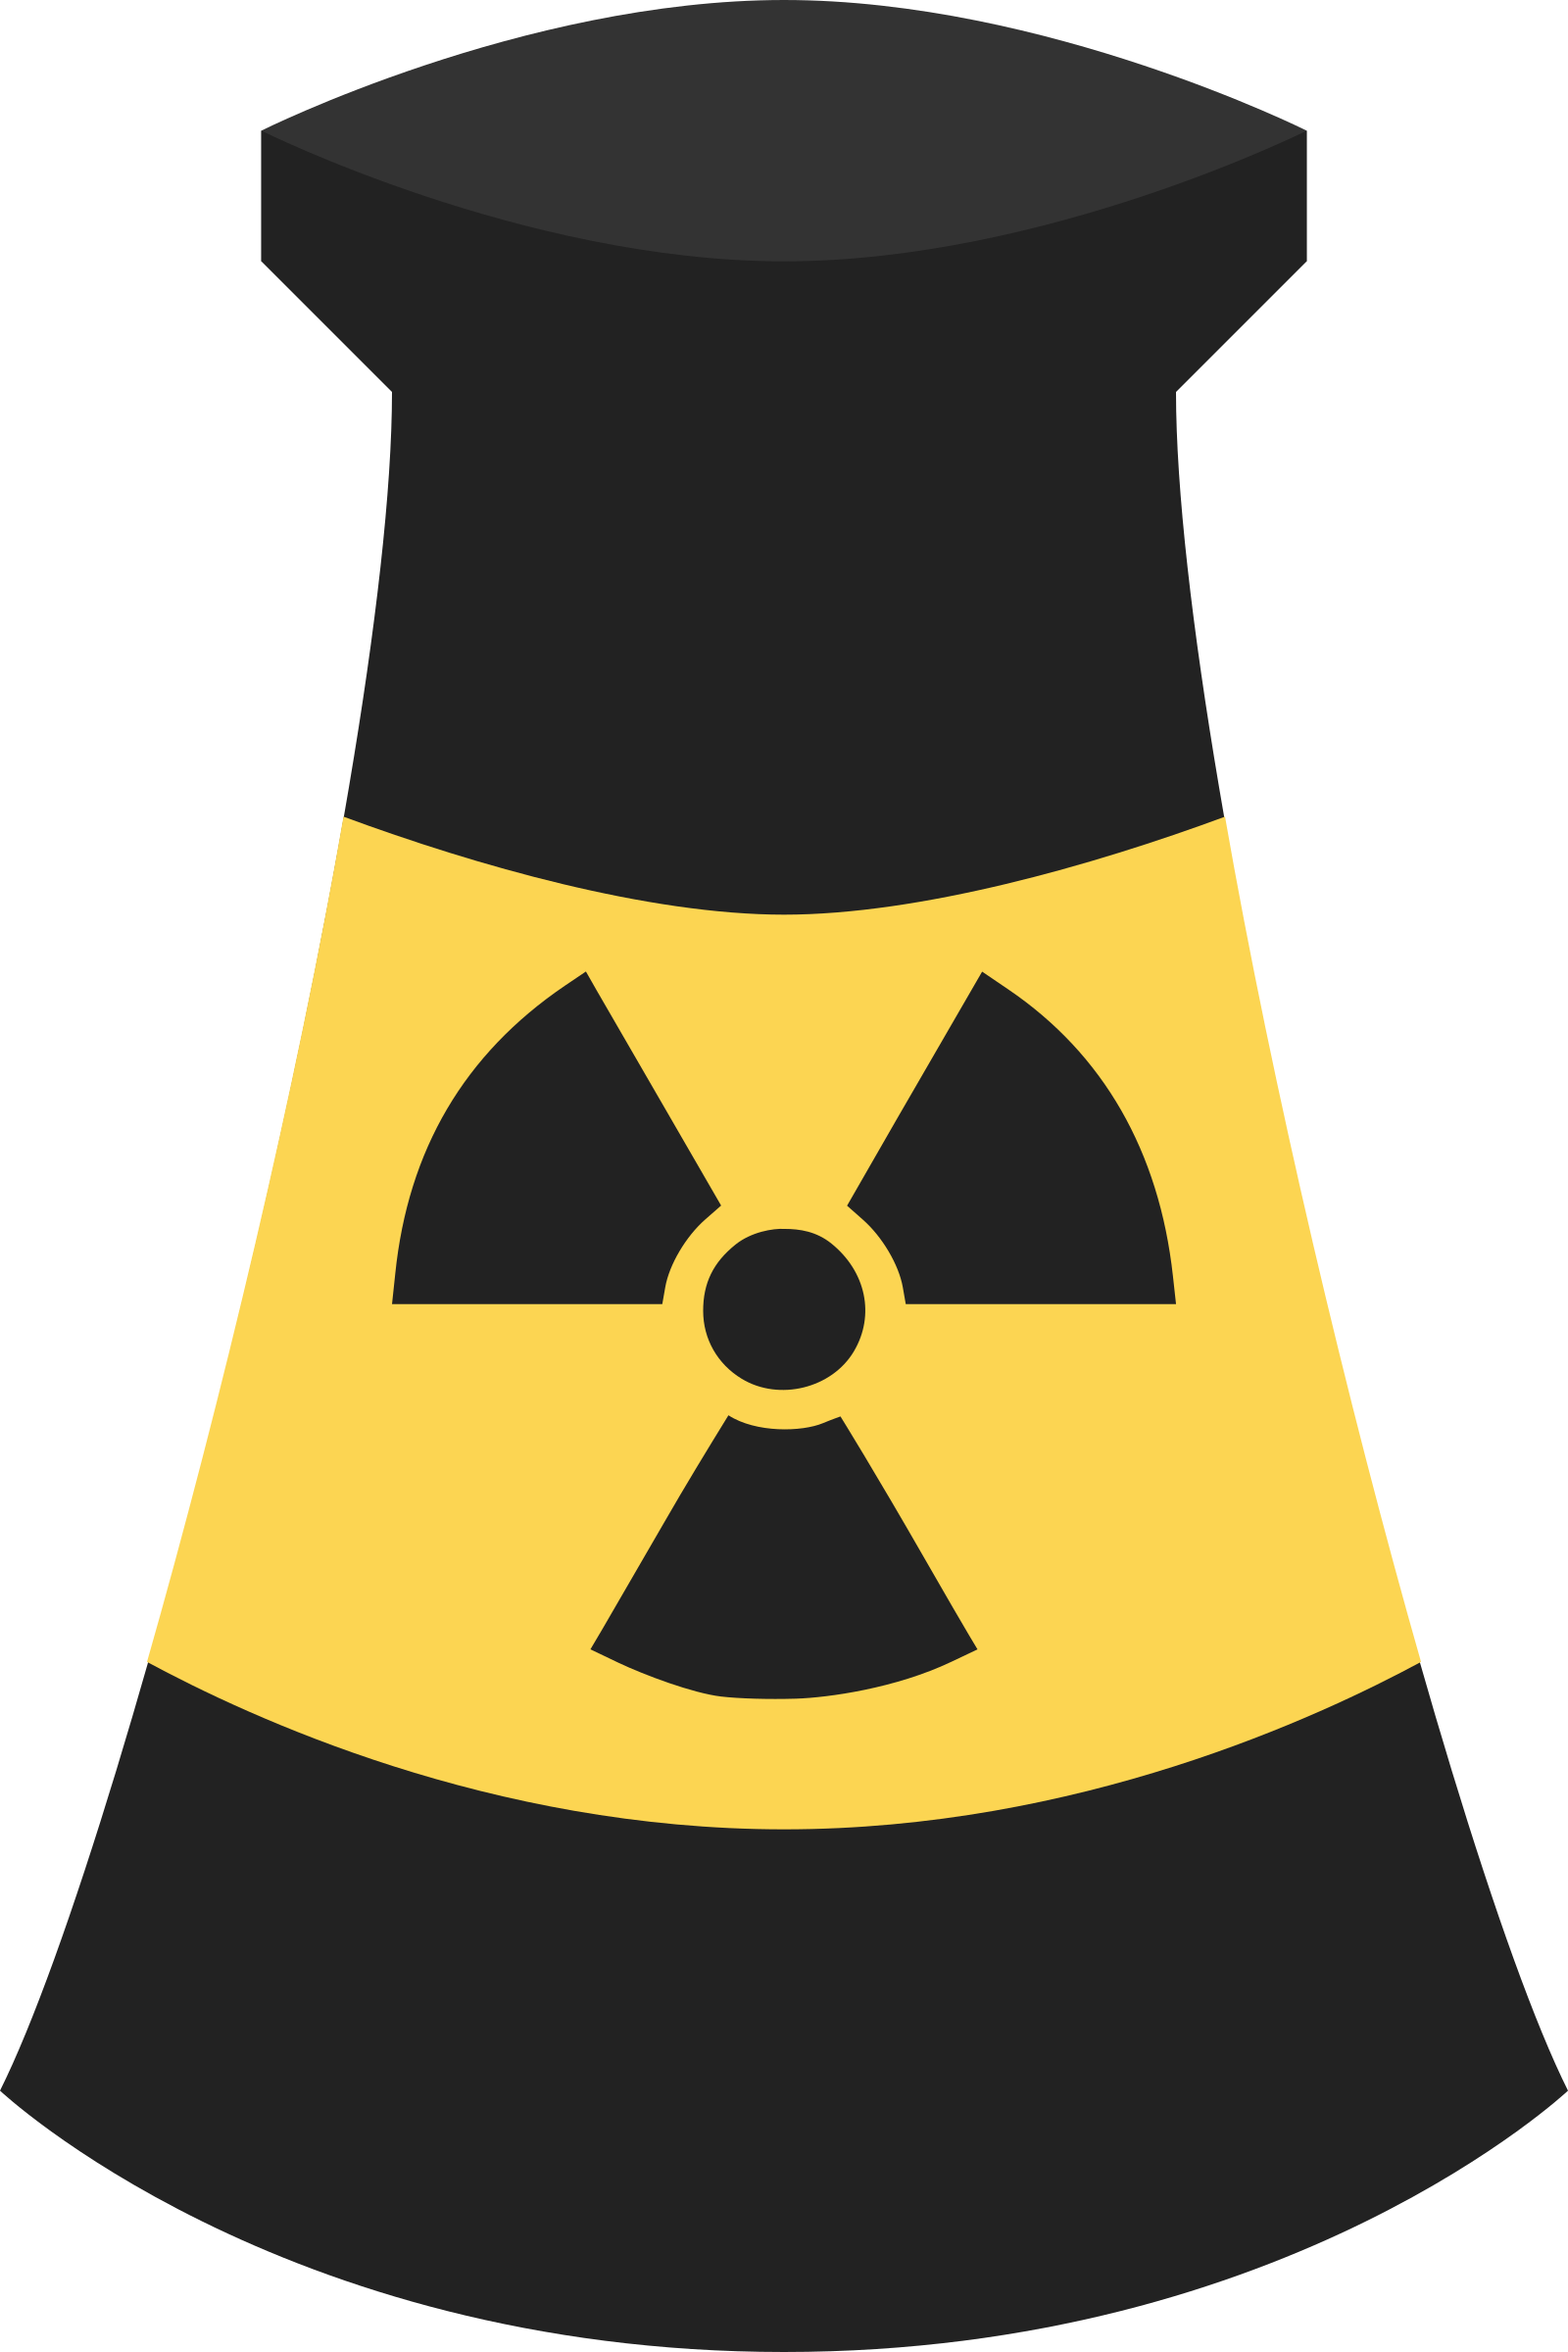 Big Image - Nuclear Power Plant Icon (1600x2400)